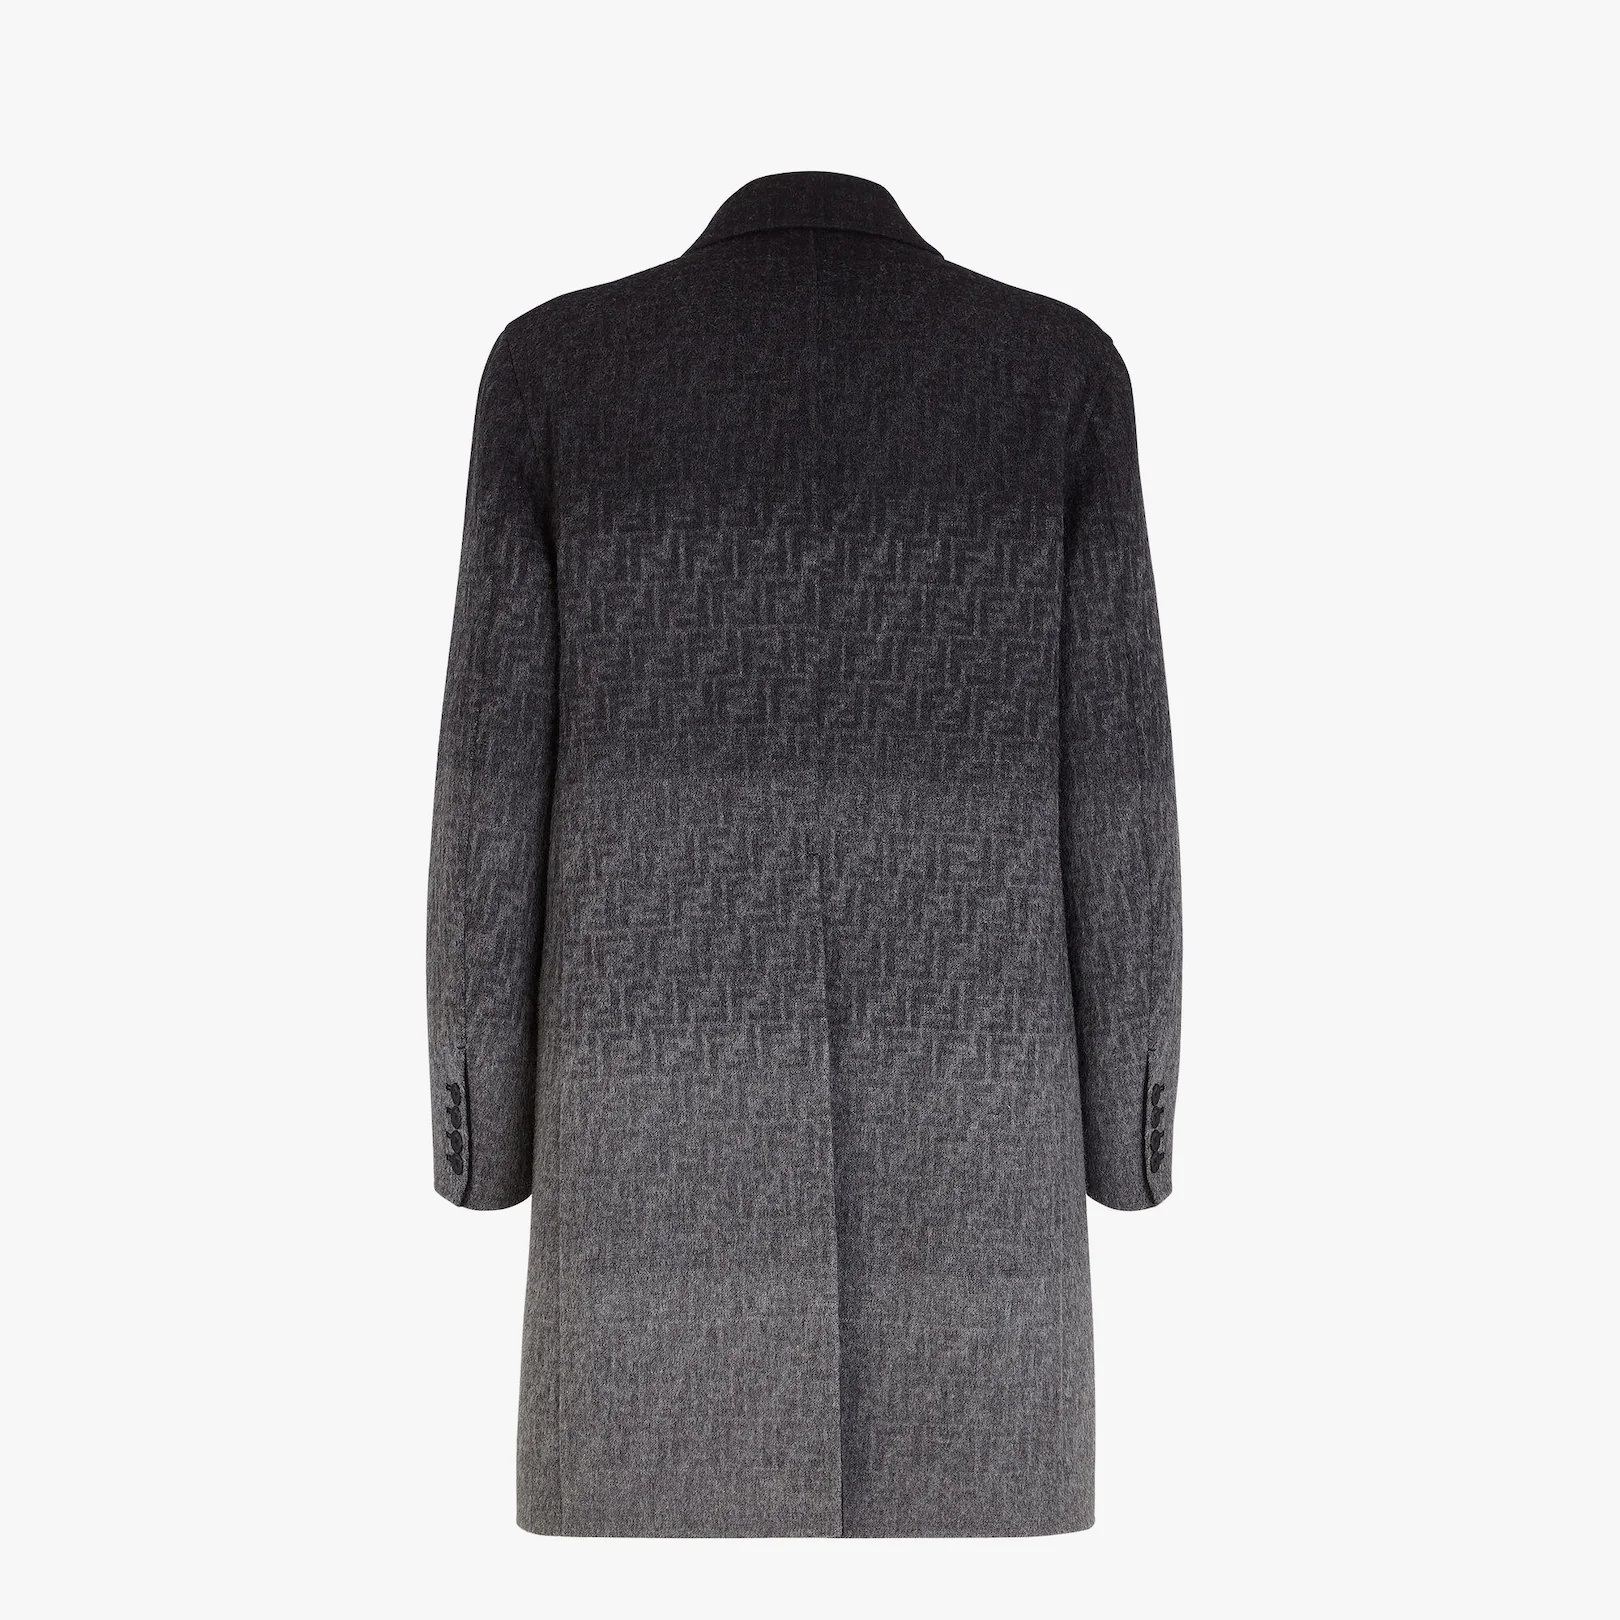 Coat from the Spring Festival Capsule Collection - 2